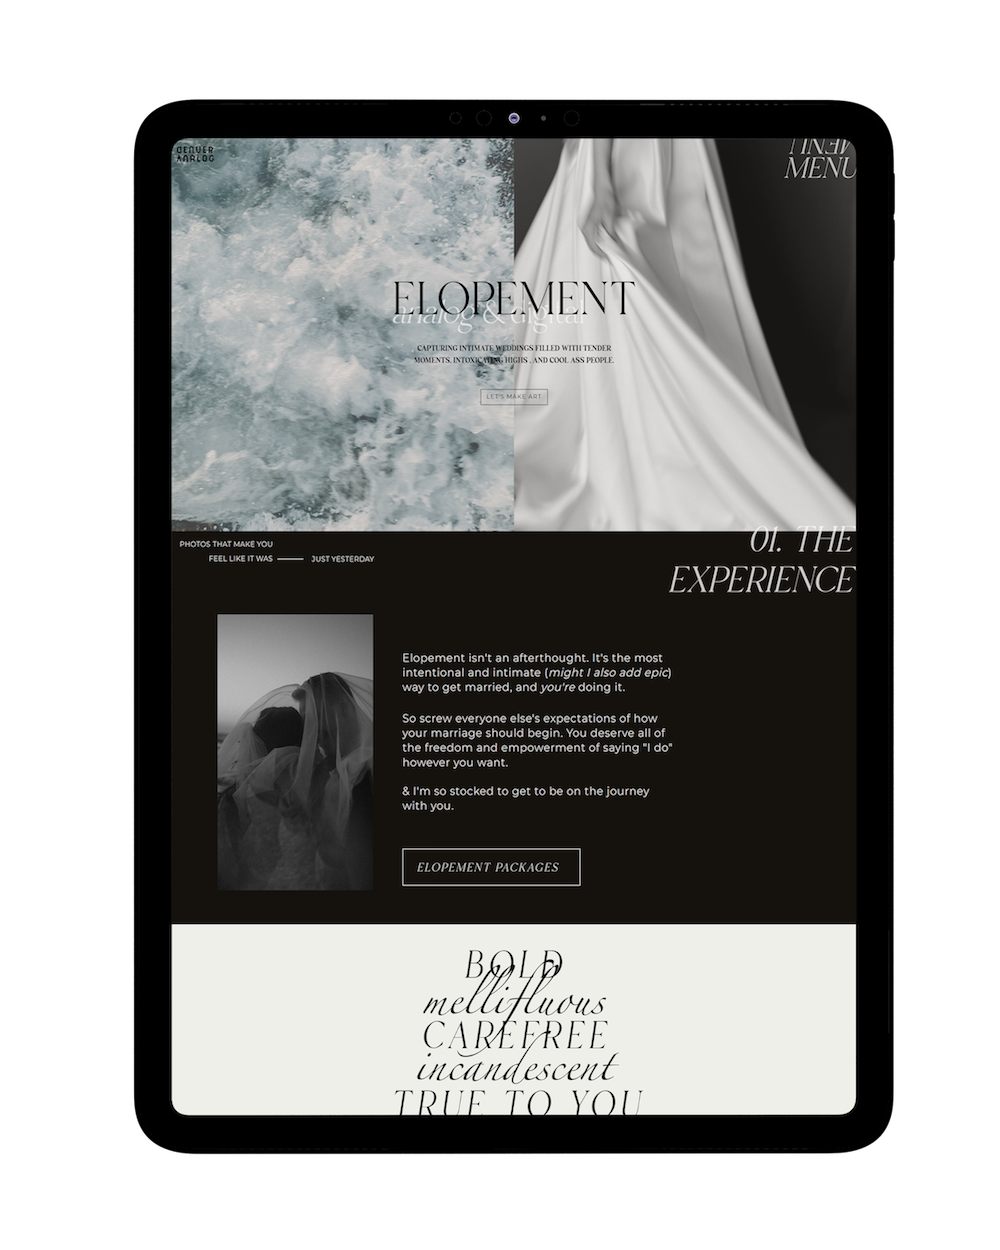 Mockup of a tablet for wedding and elopement wedding photographer copy and web design project.